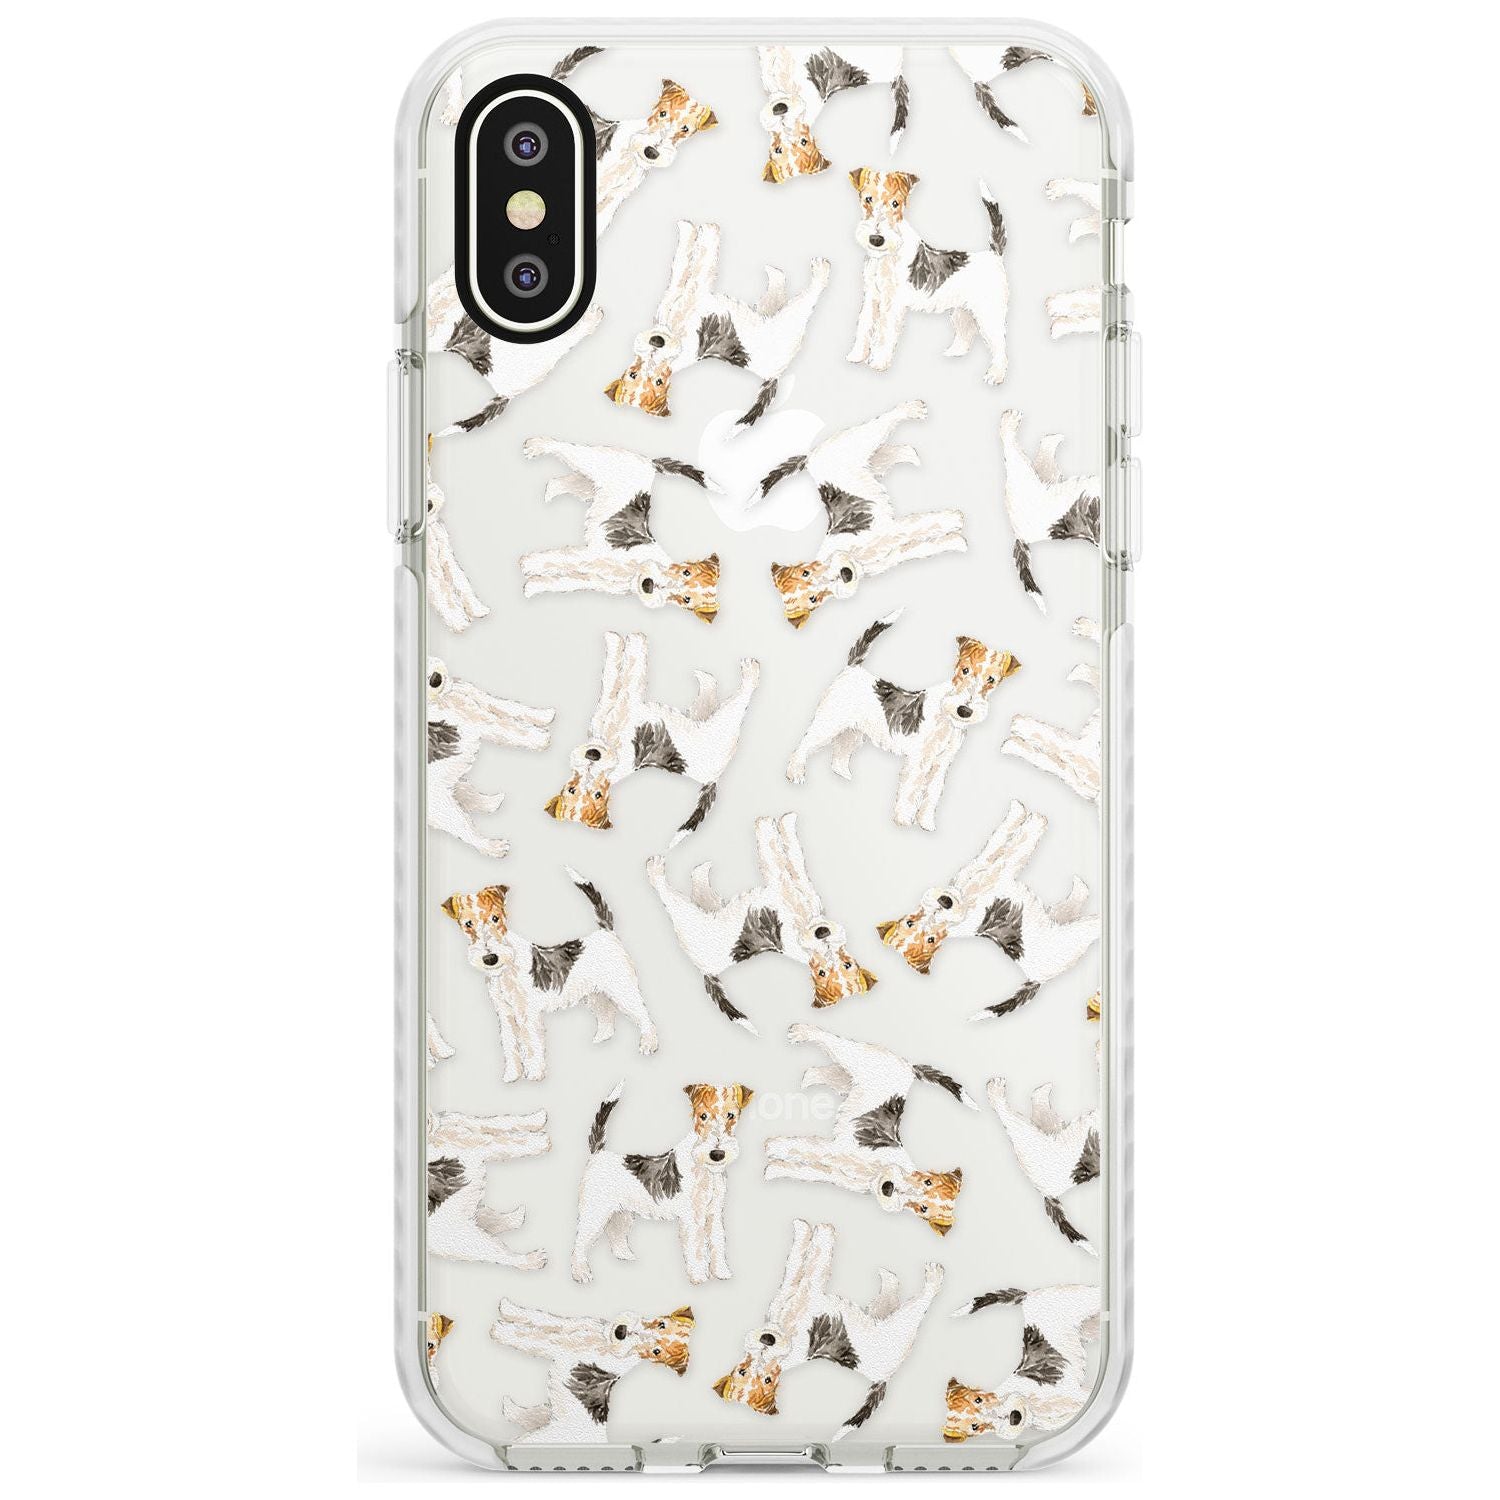 Wire Haired Fox Terrier Watercolour Dog Pattern Impact Phone Case for iPhone X XS Max XR